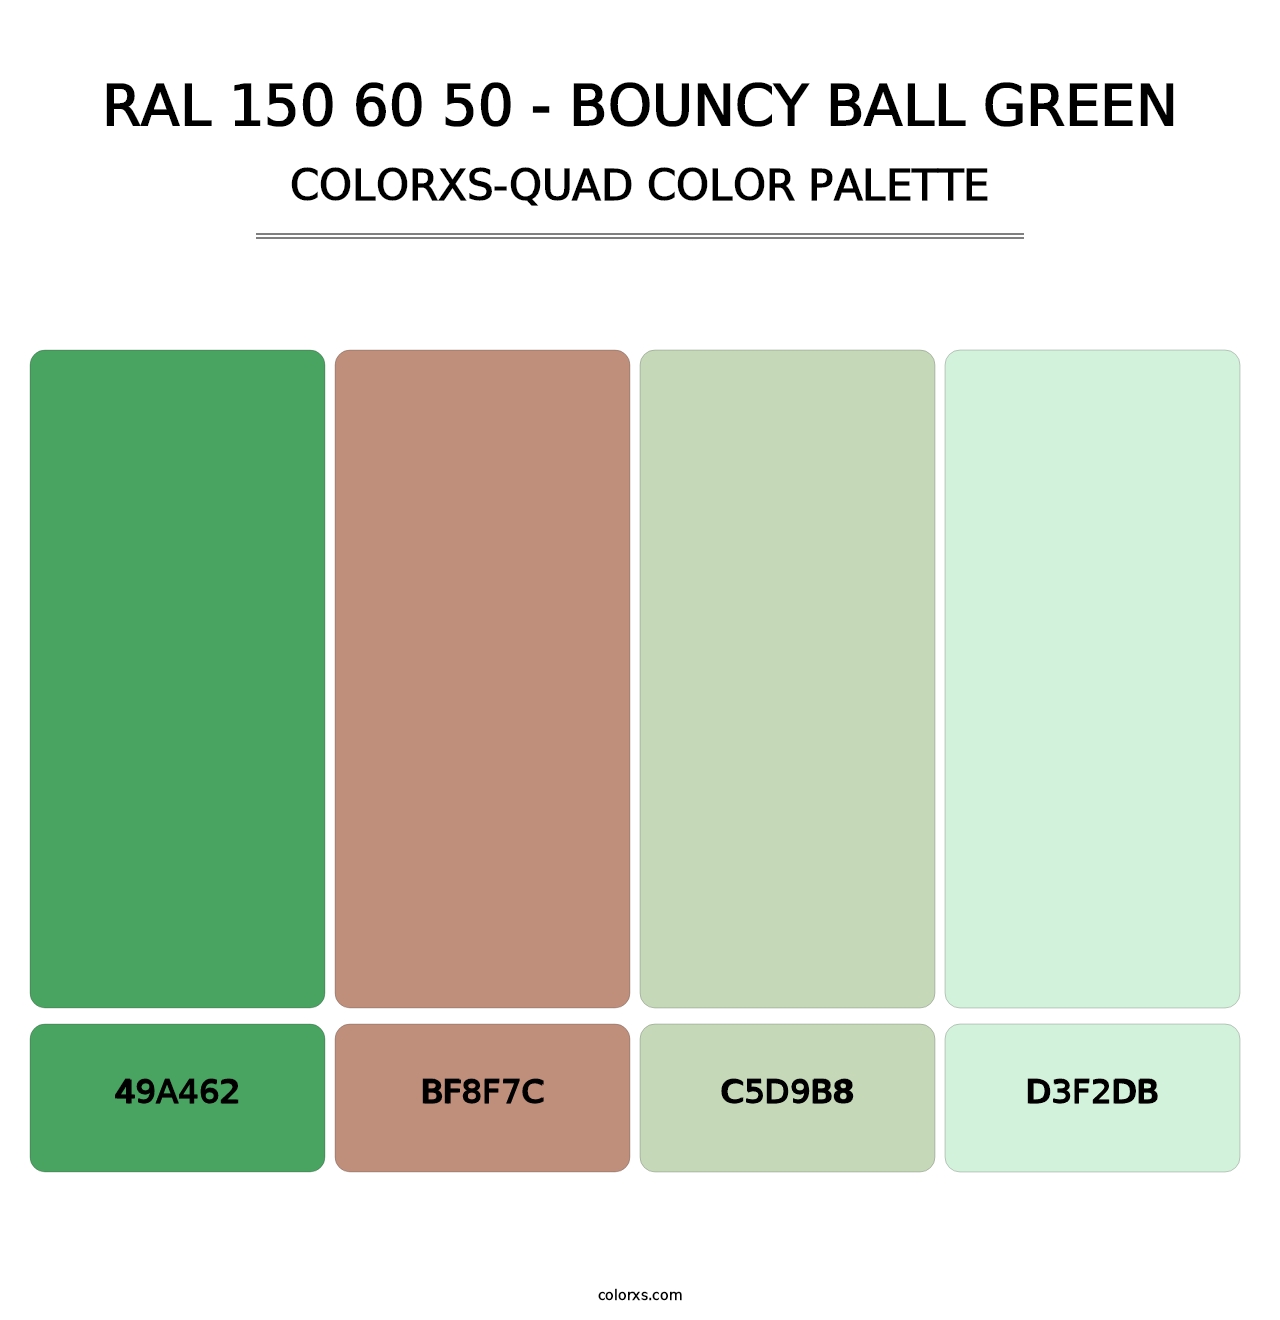 RAL 150 60 50 - Bouncy Ball Green - Colorxs Quad Palette